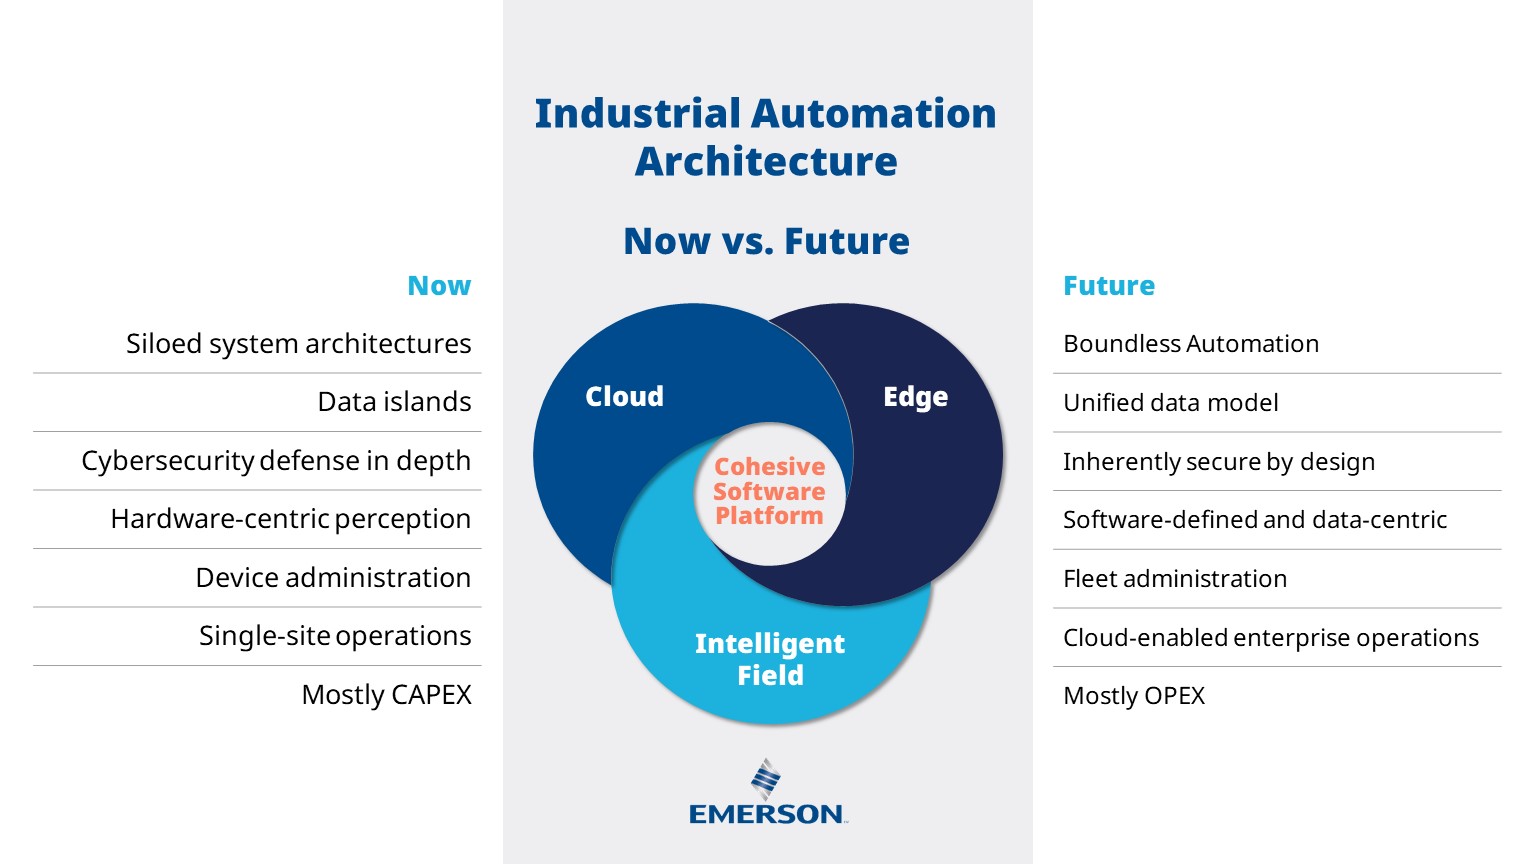 Emerson's Boundless Automation